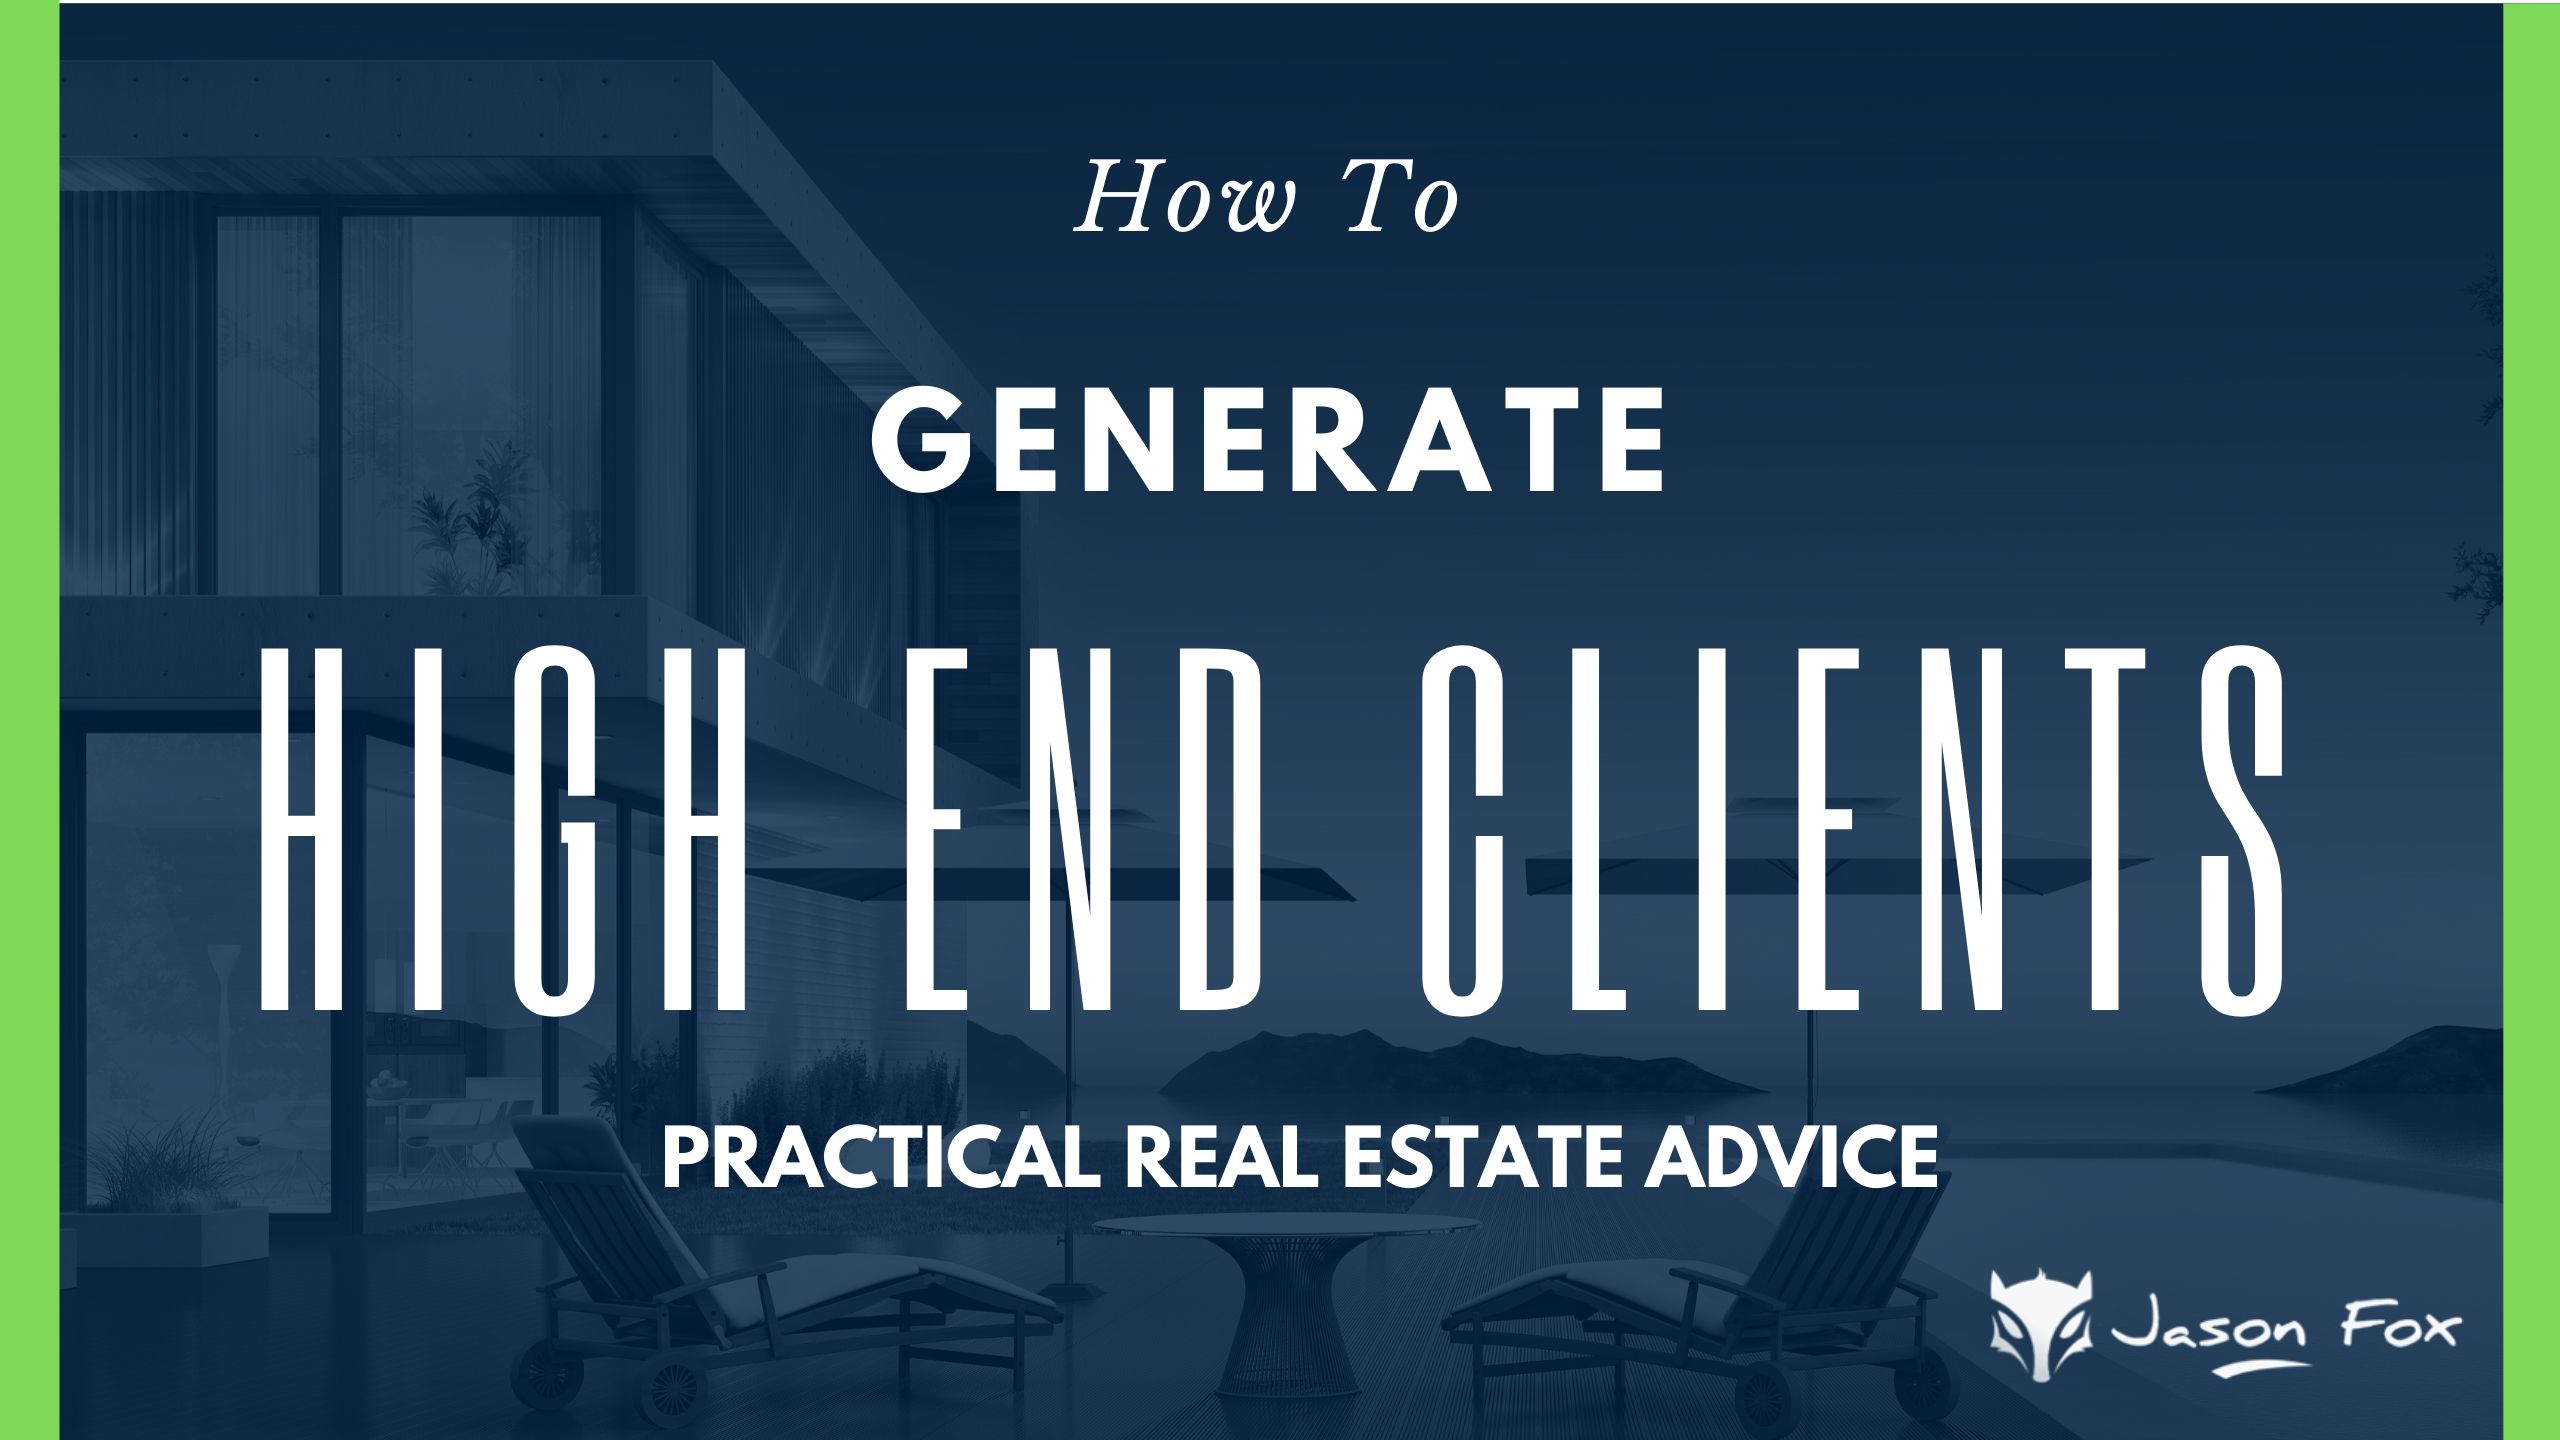 7 Tried and True Real Estate Marketing Tips to Get More Clients in 2020 -  Venngage